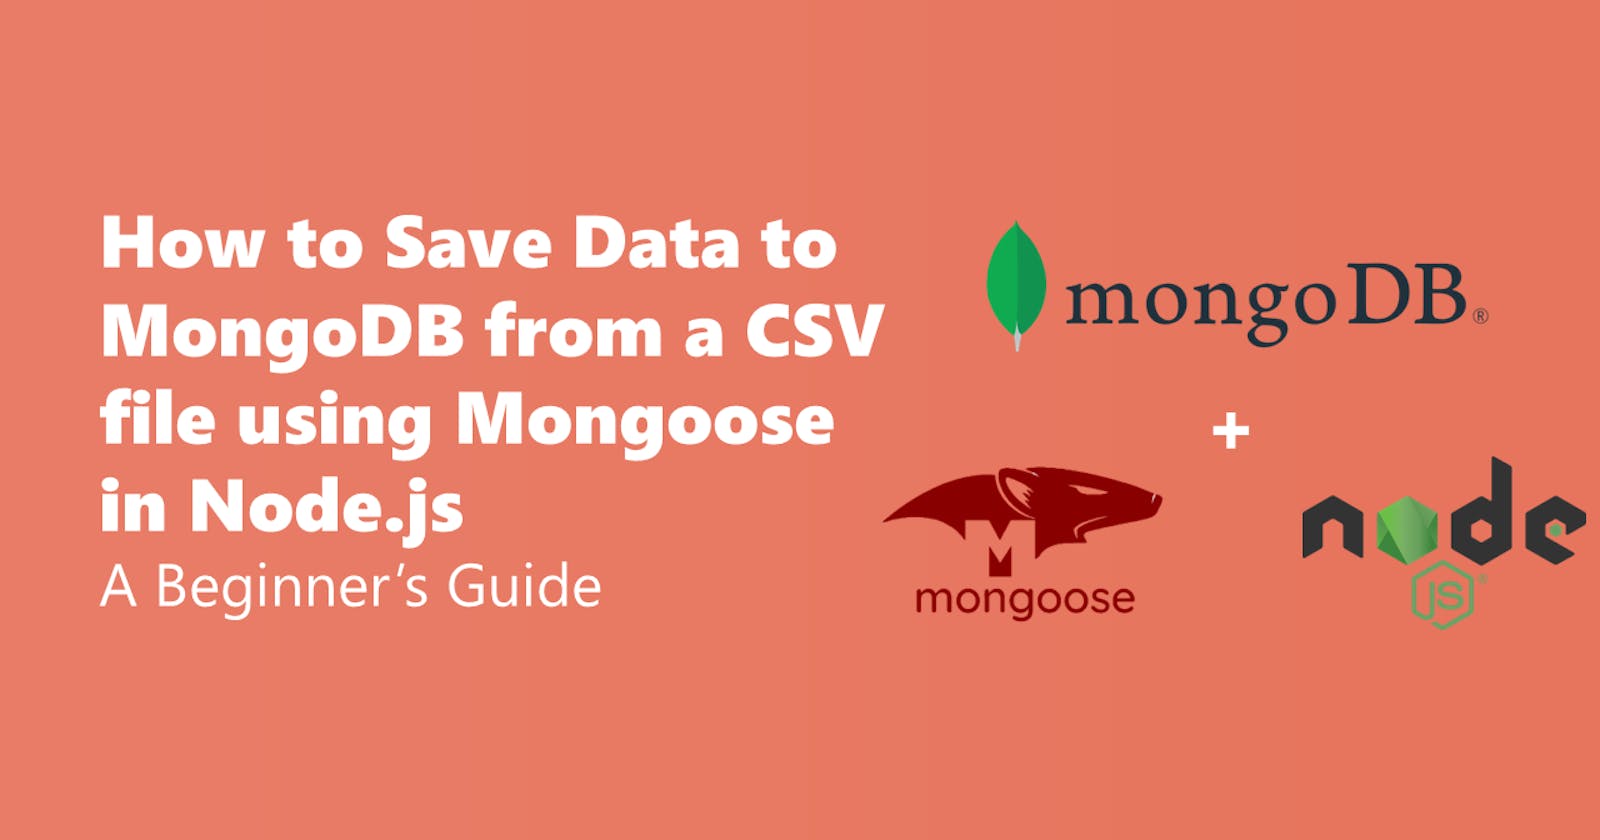 How to Save Data to MongoDB from a CSV file using Mongoose in Node.Js